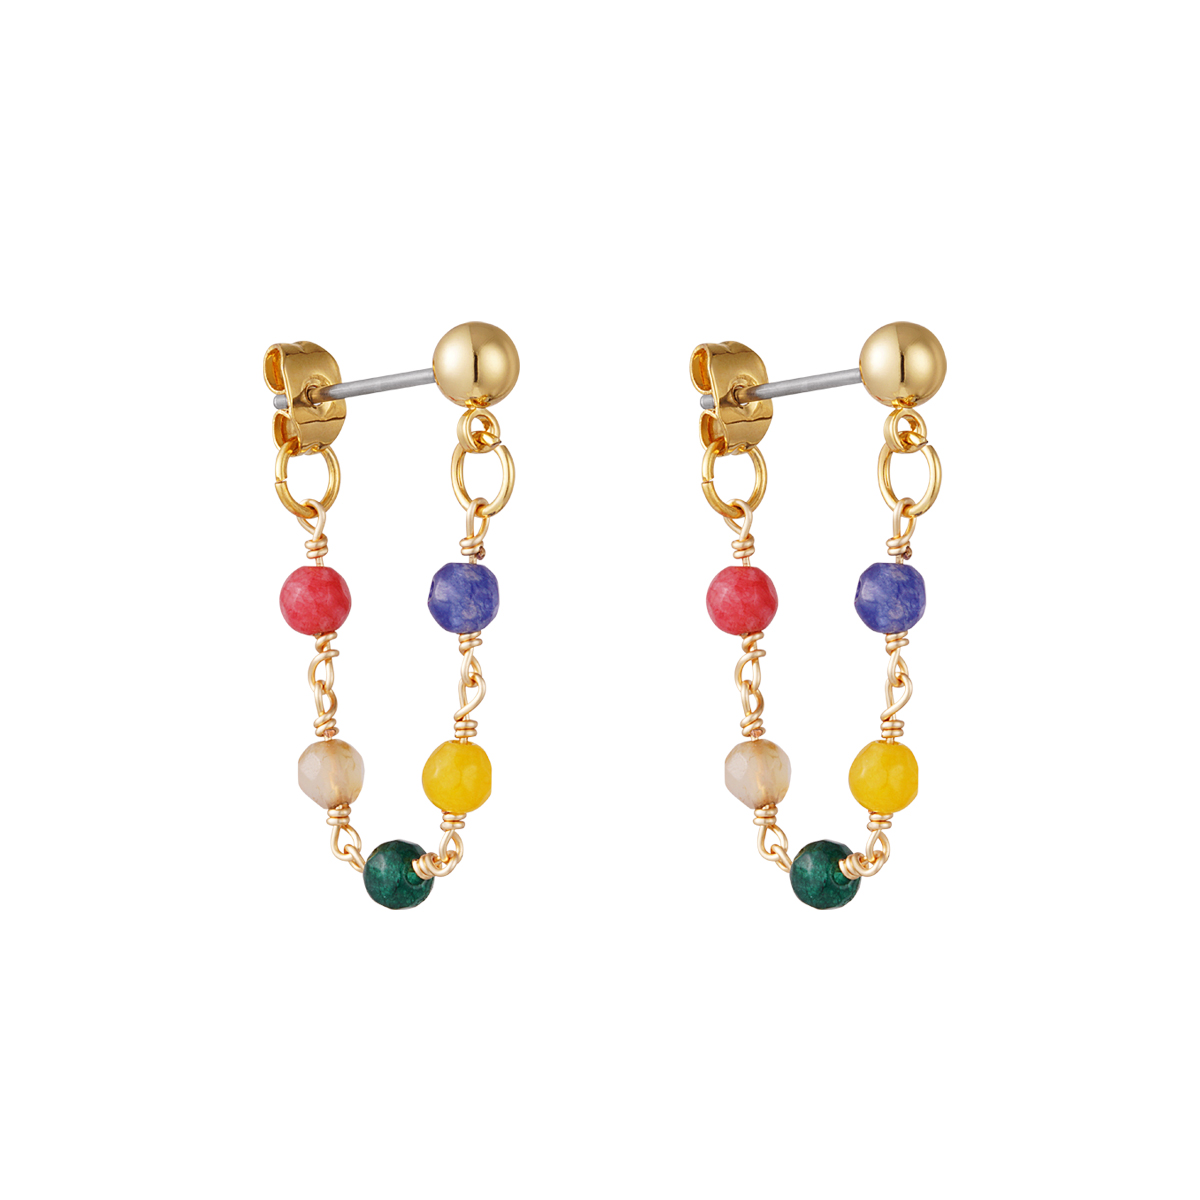 Earrings with chain and stones